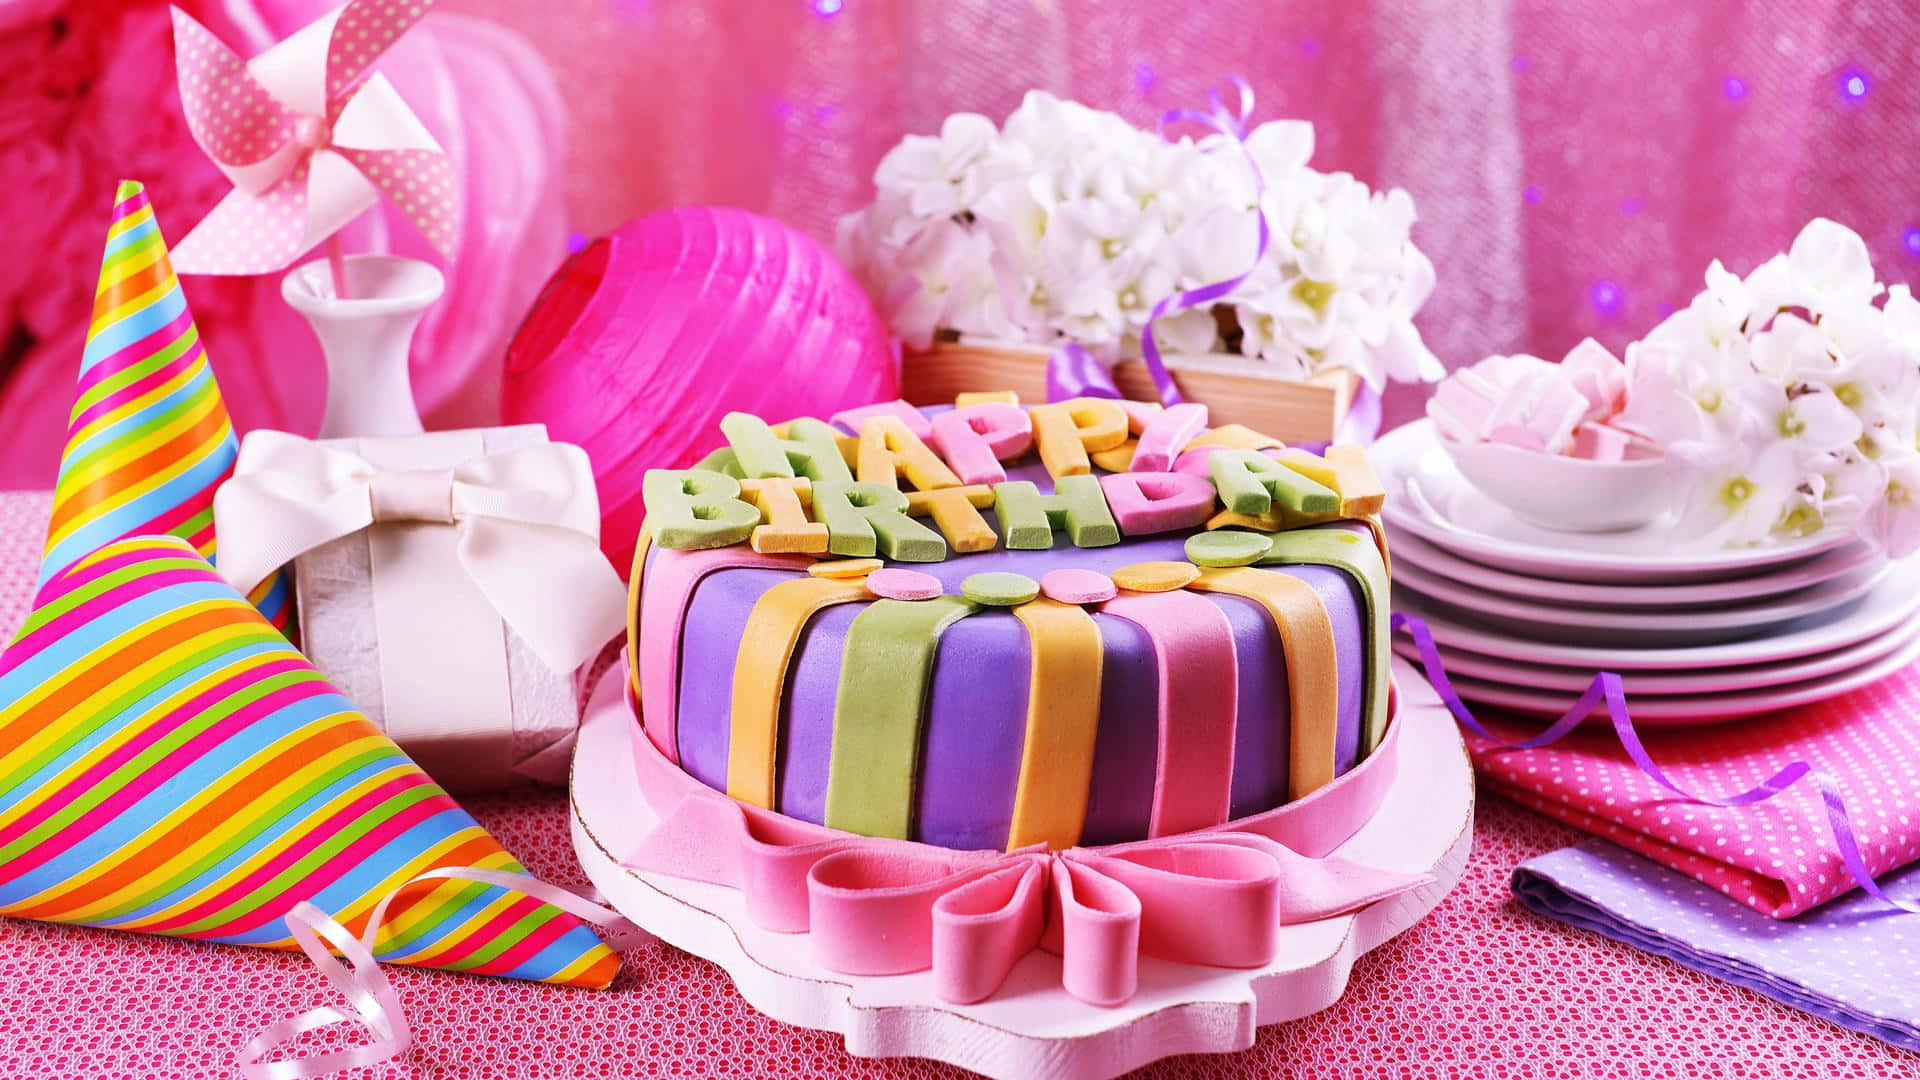 Colorful and Delicious Birthday Cake with Sparkling Candles